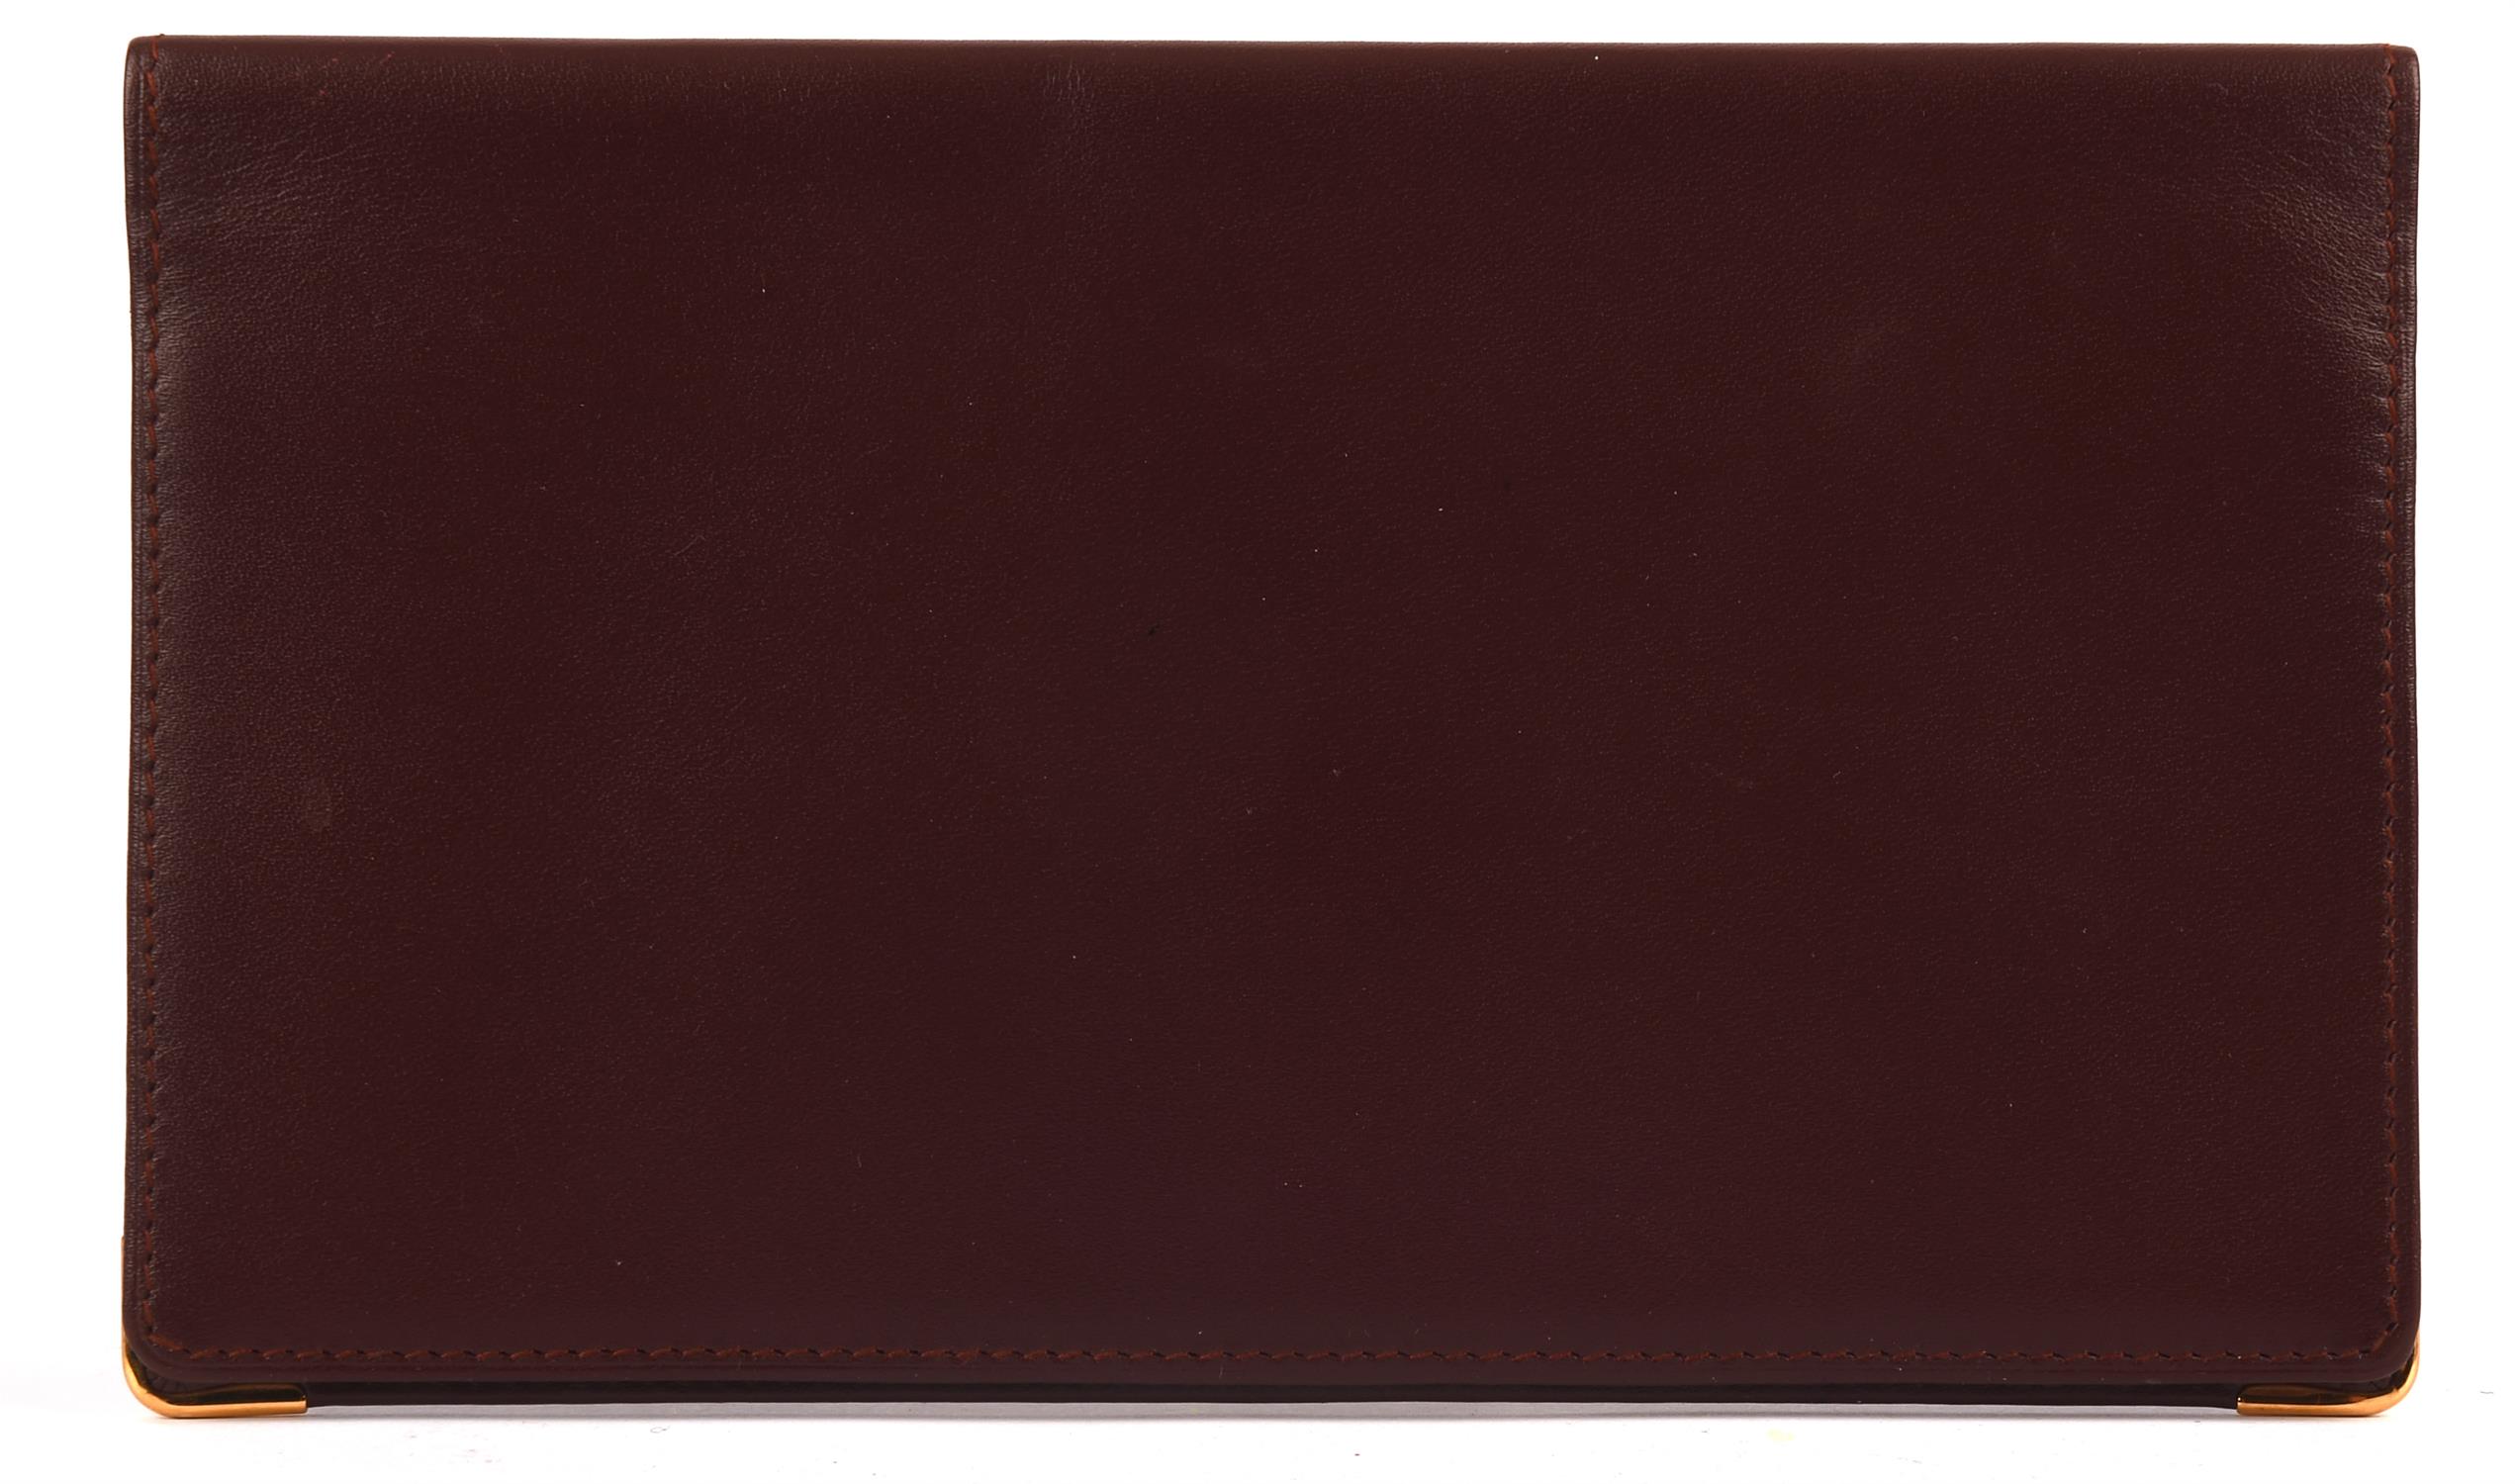 CARTIER burgundy bifold coat wallet with gold coloured hardware unused and unboxed (8cm x11cm) - Image 2 of 3